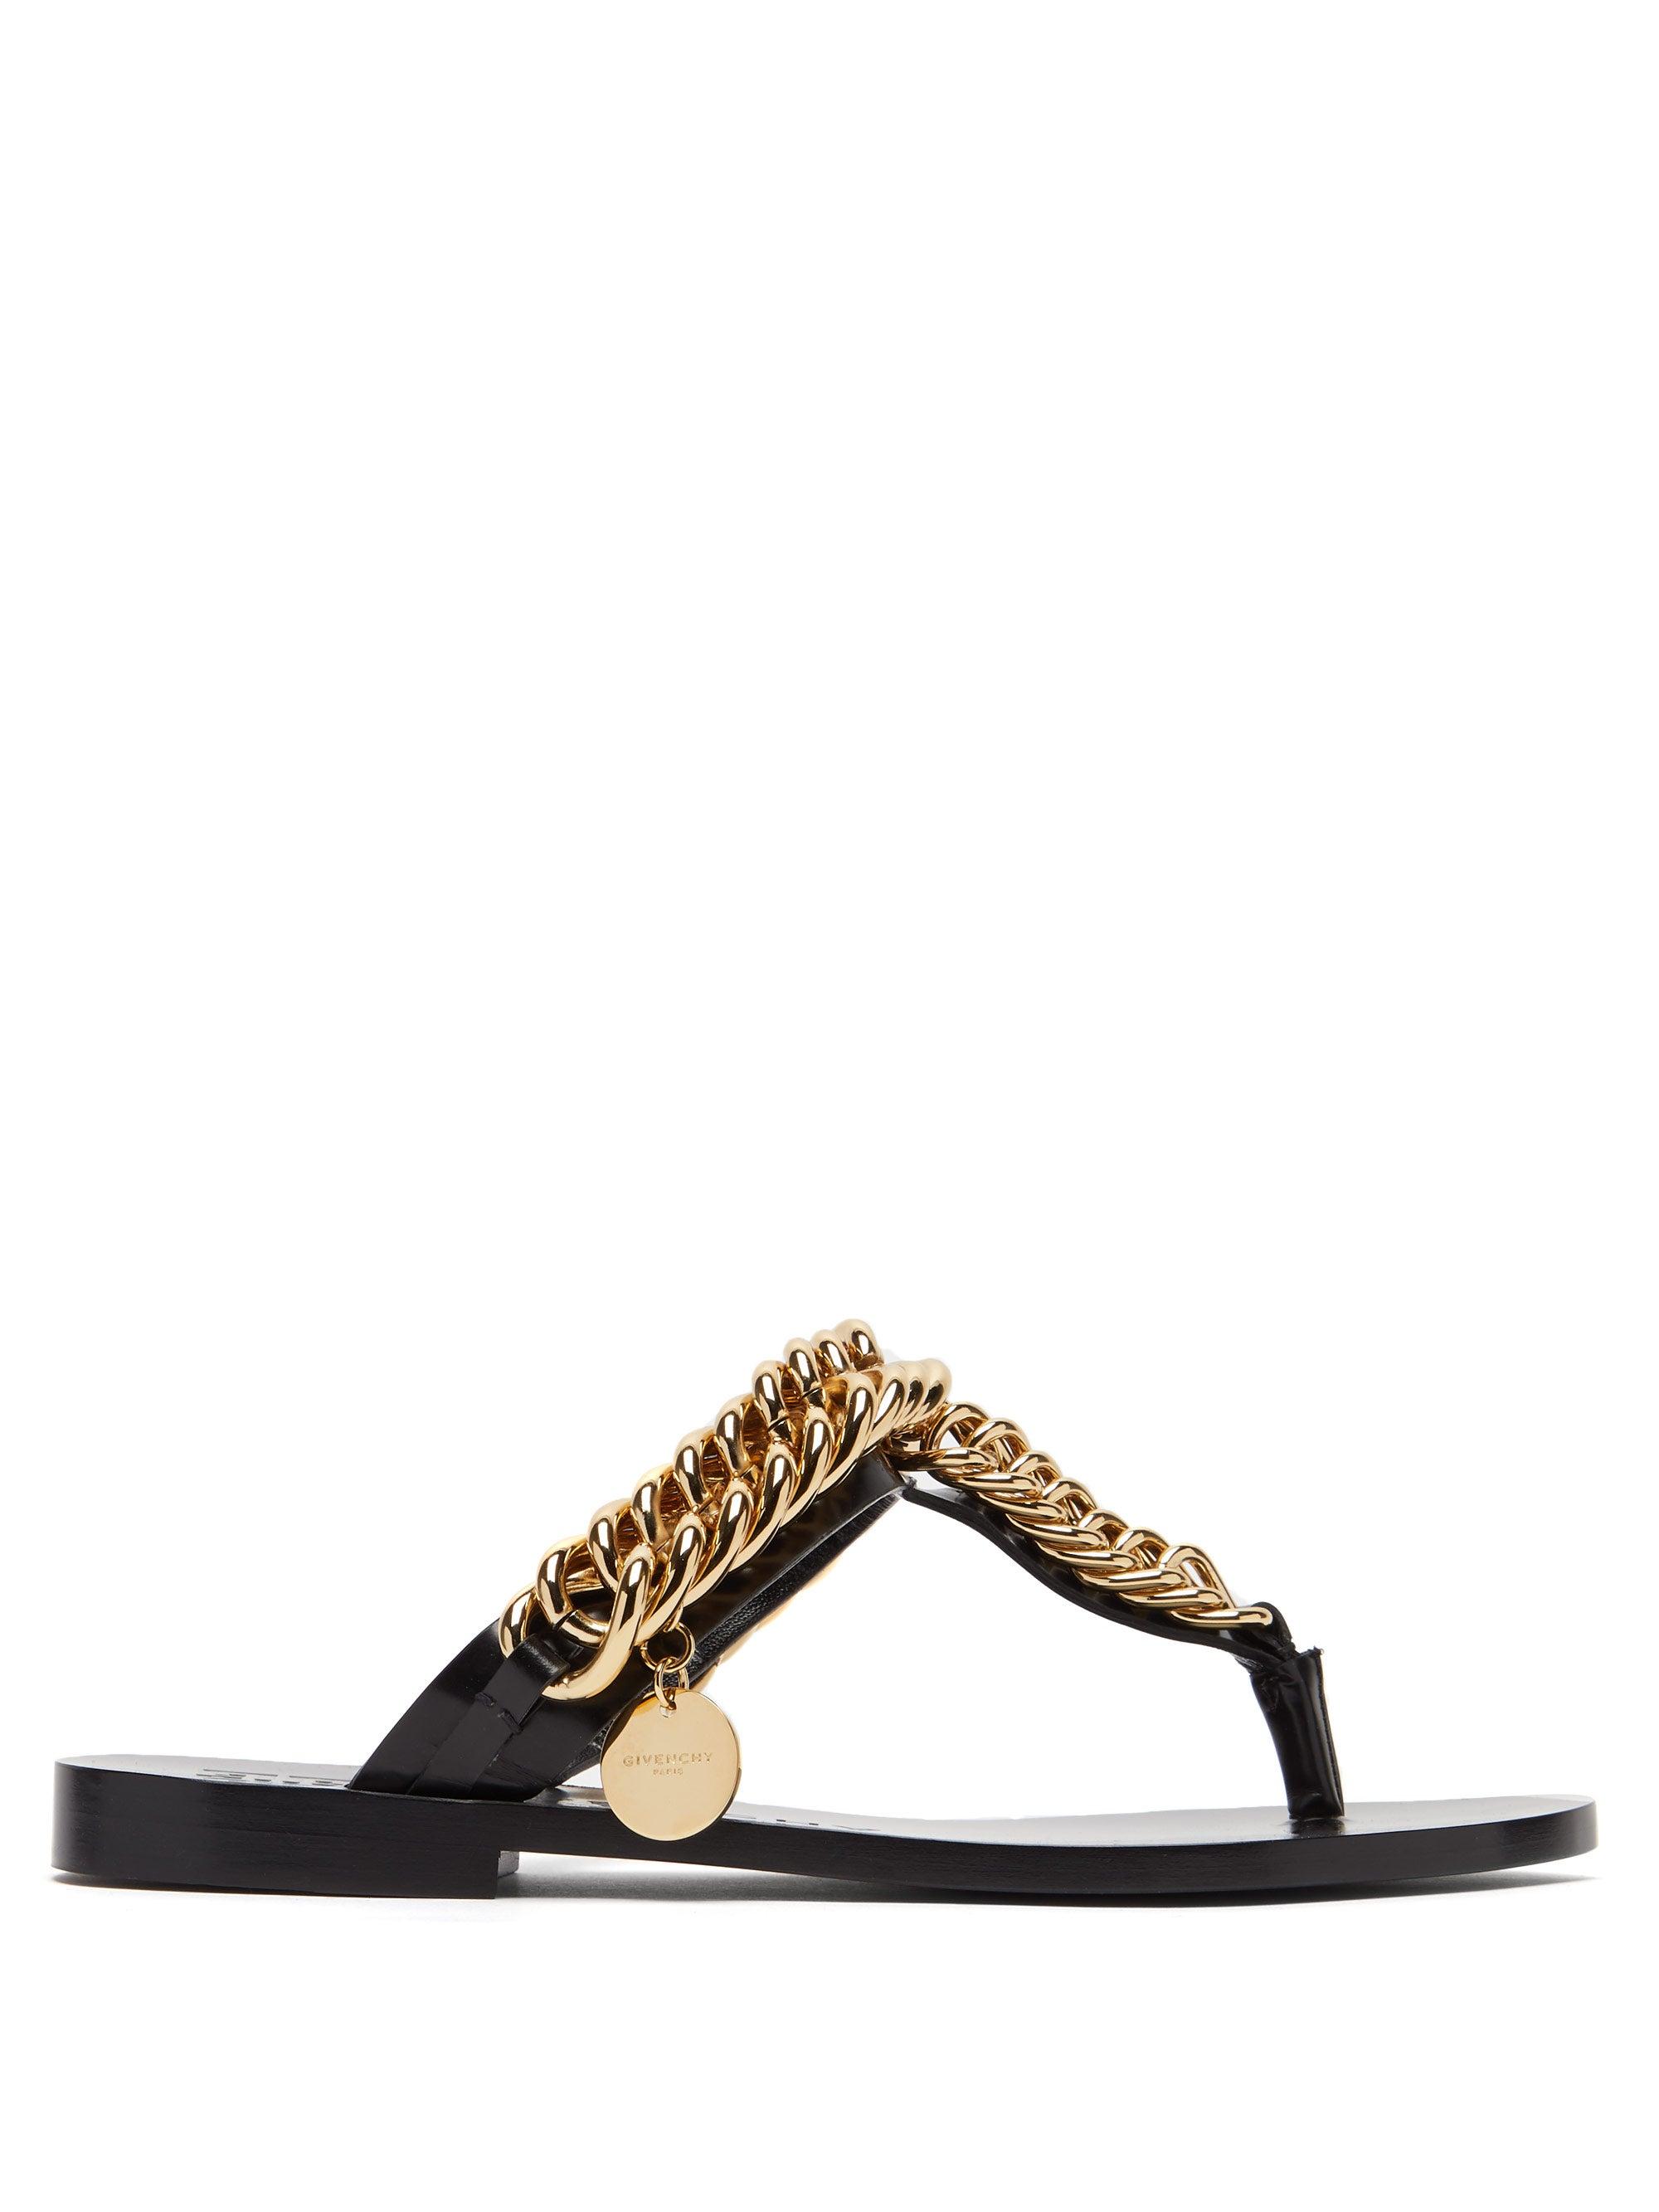 Givenchy Chain-embellished Leather Sandals in Black | Lyst